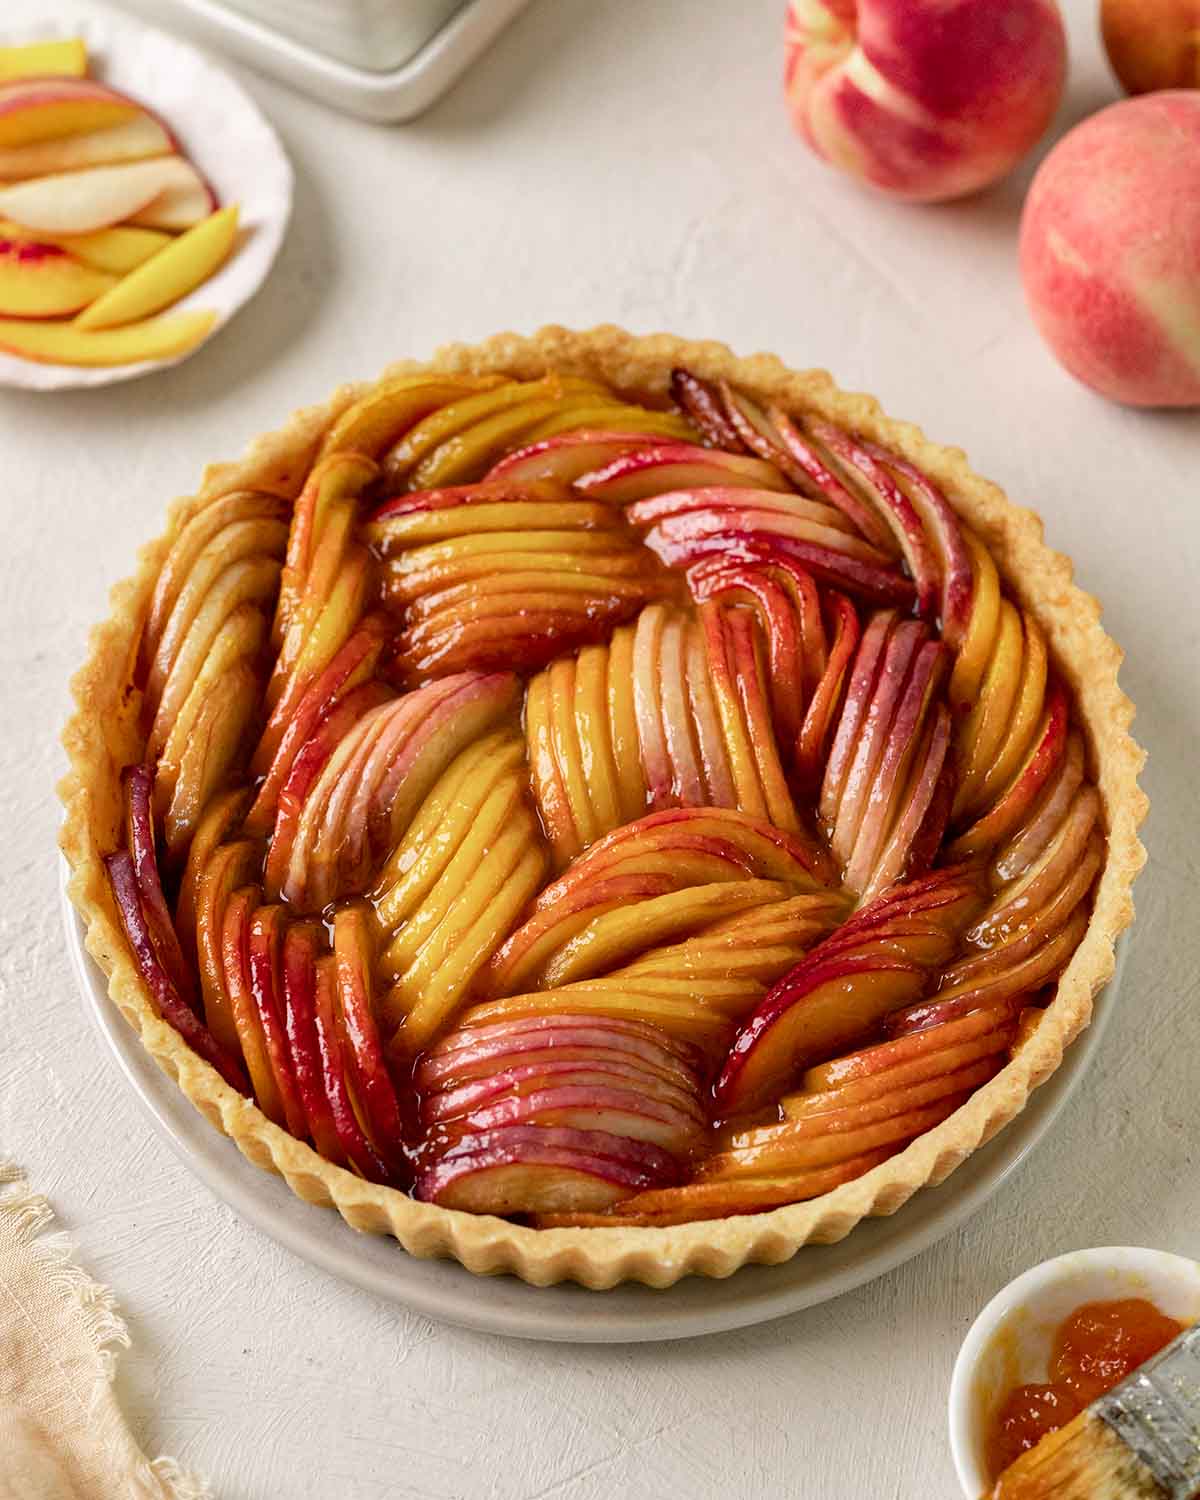 Baked tart consisting of thinly sliced peaches in a buttery pastry shell. Peaches have a thick sticky glaze on top.